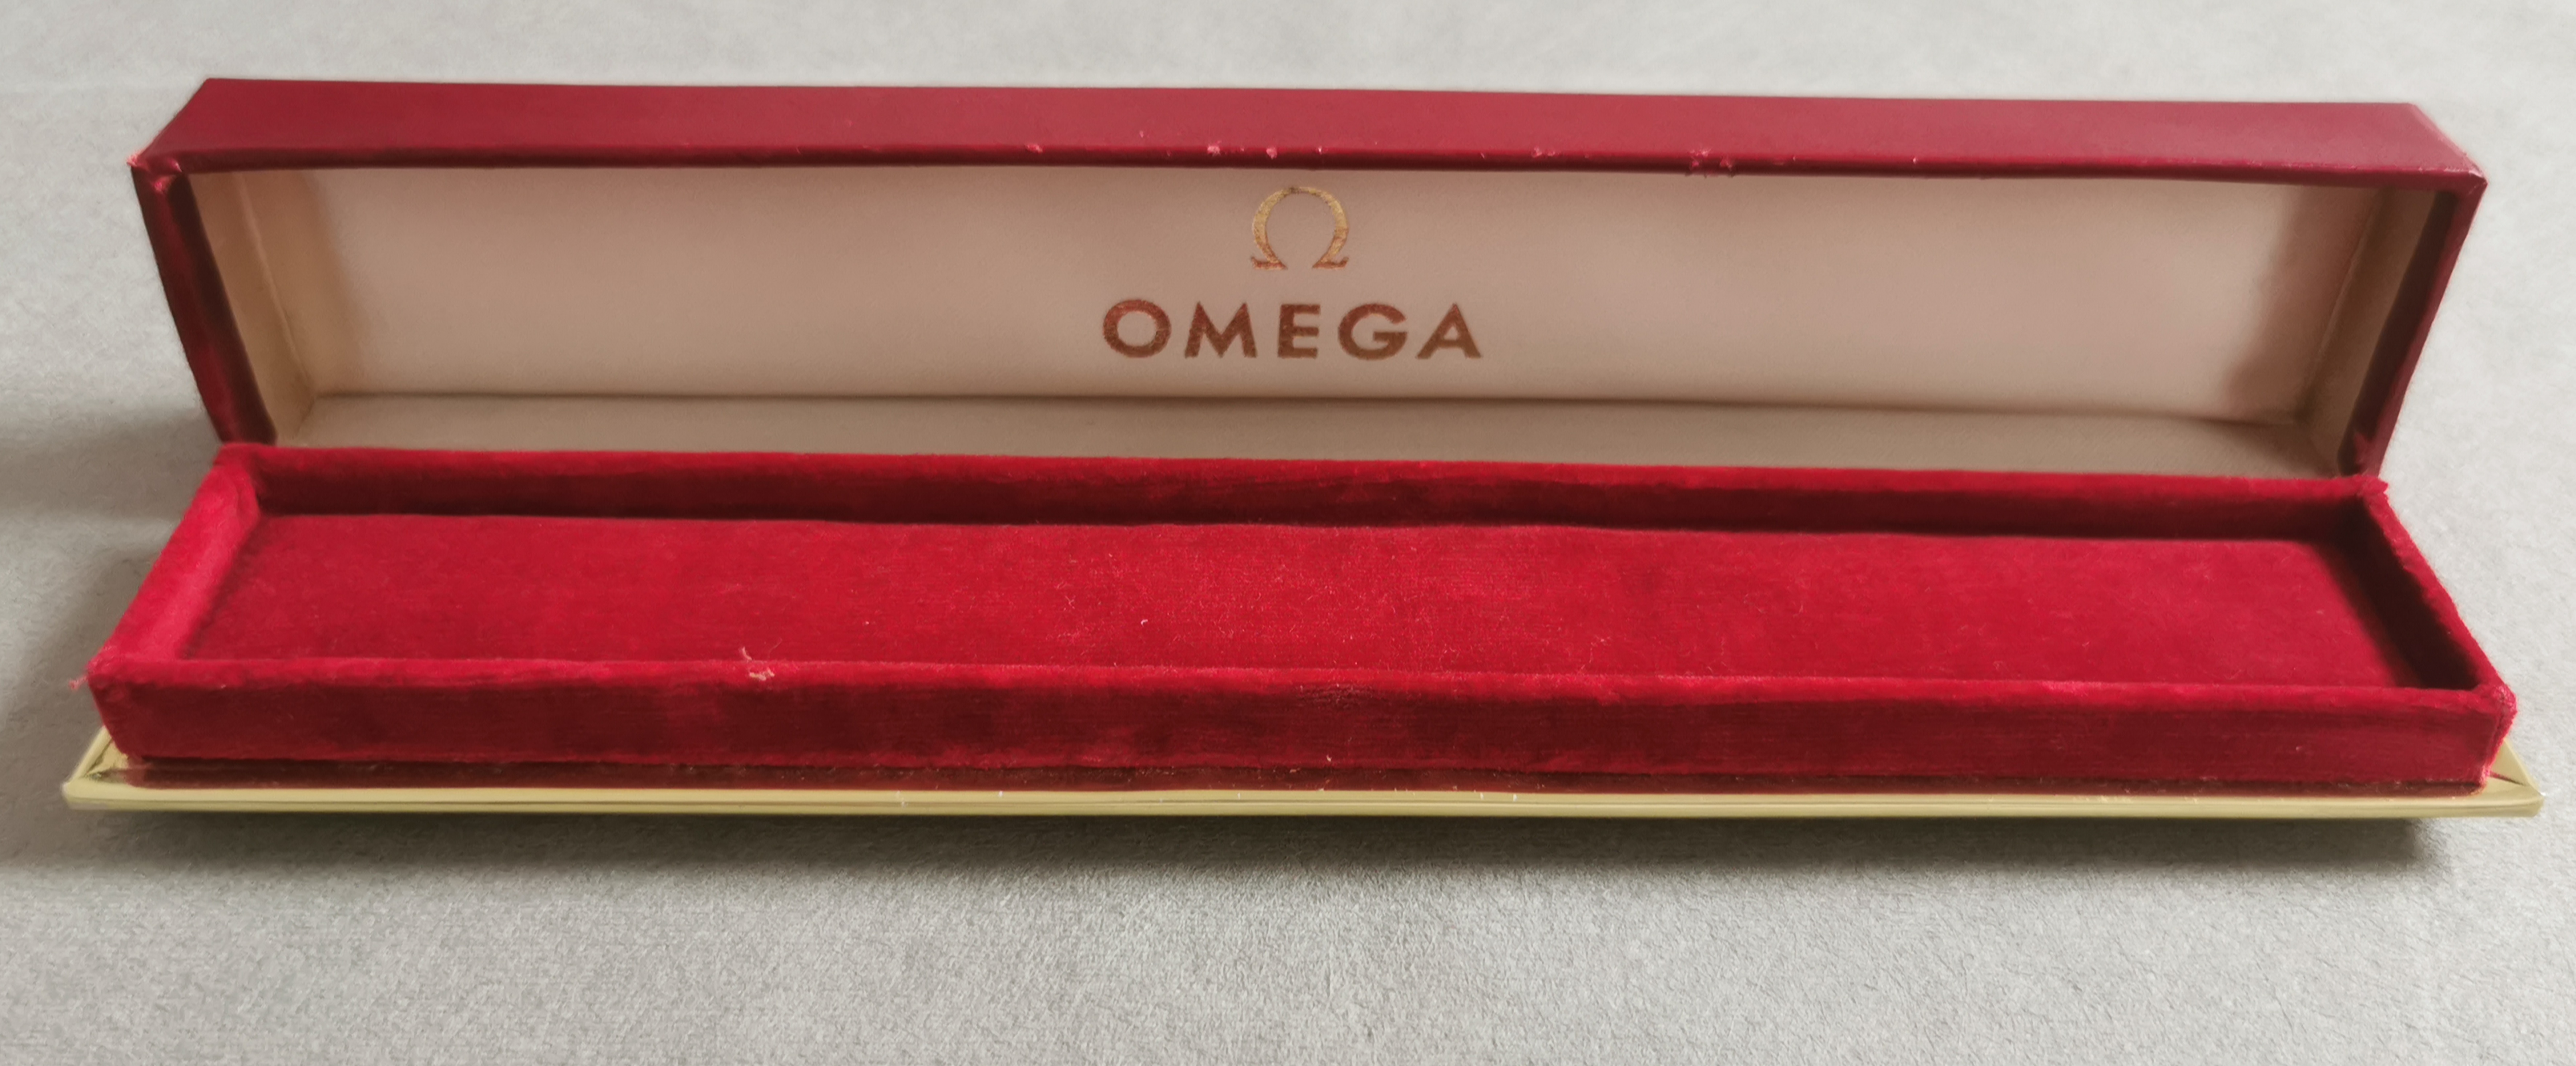 Omega vintage watch box leather red for women models like new condition T3 | San Giorgio a Cremano